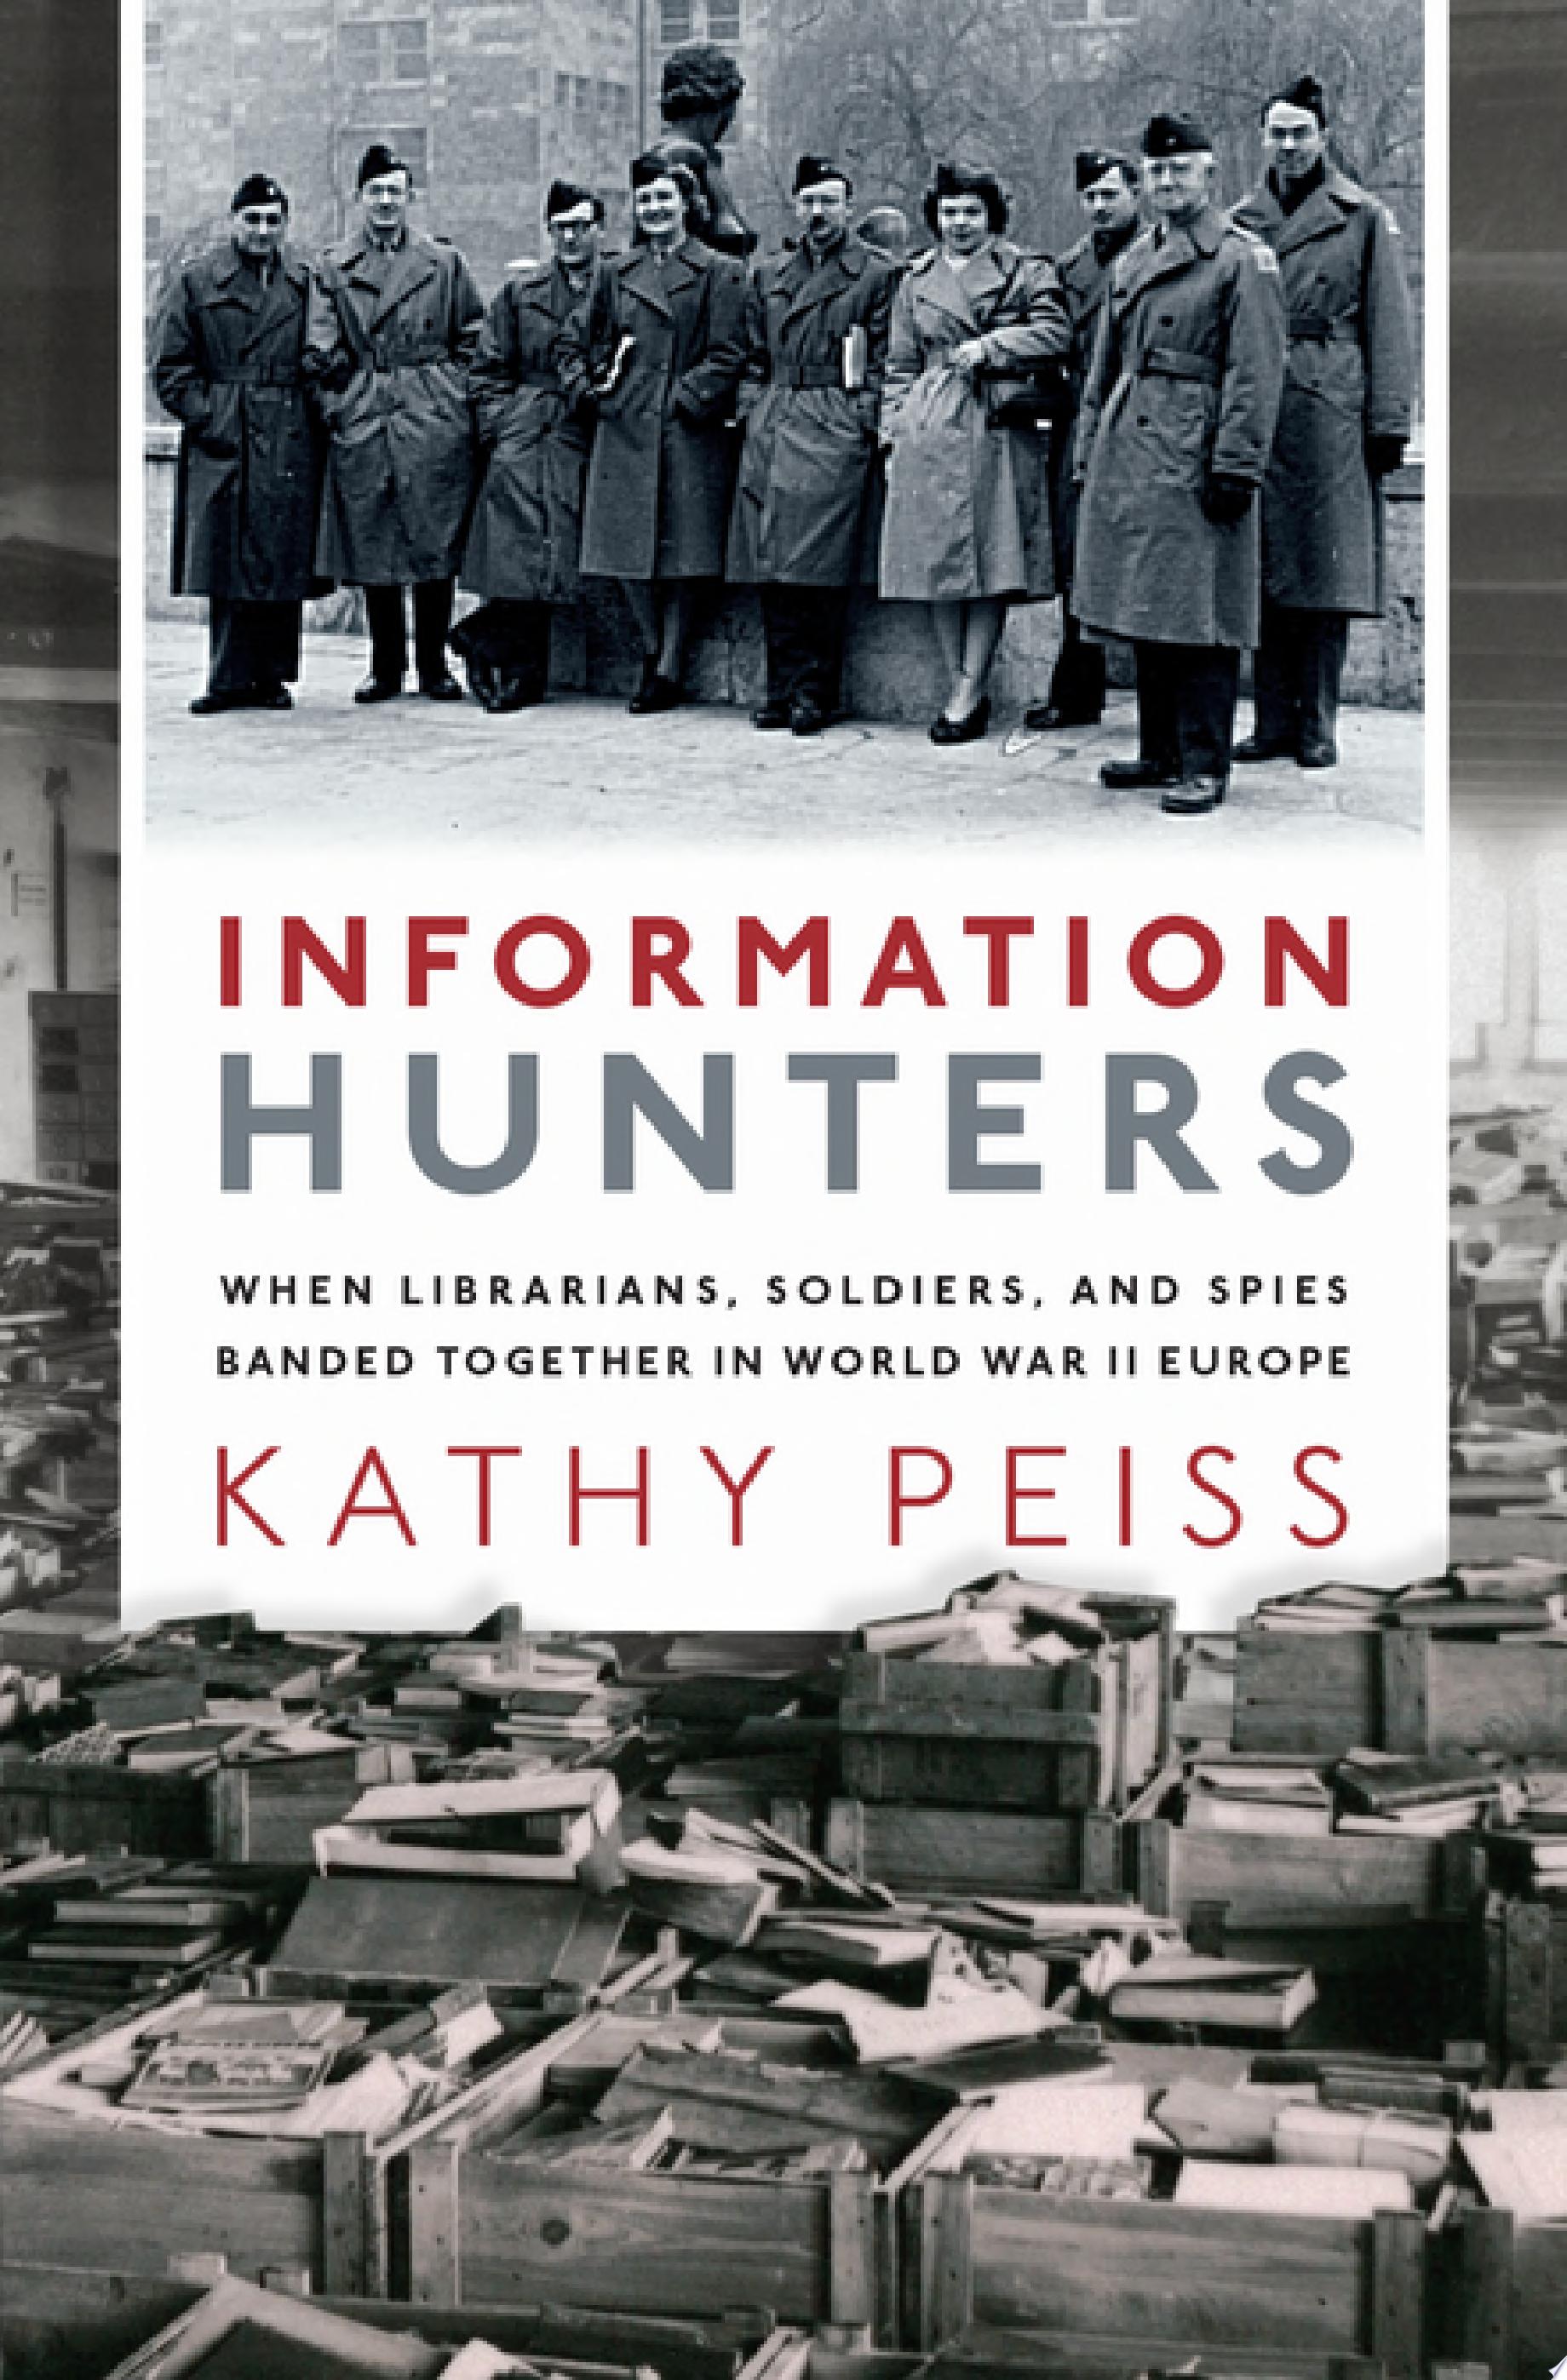 Image for "Information Hunters"